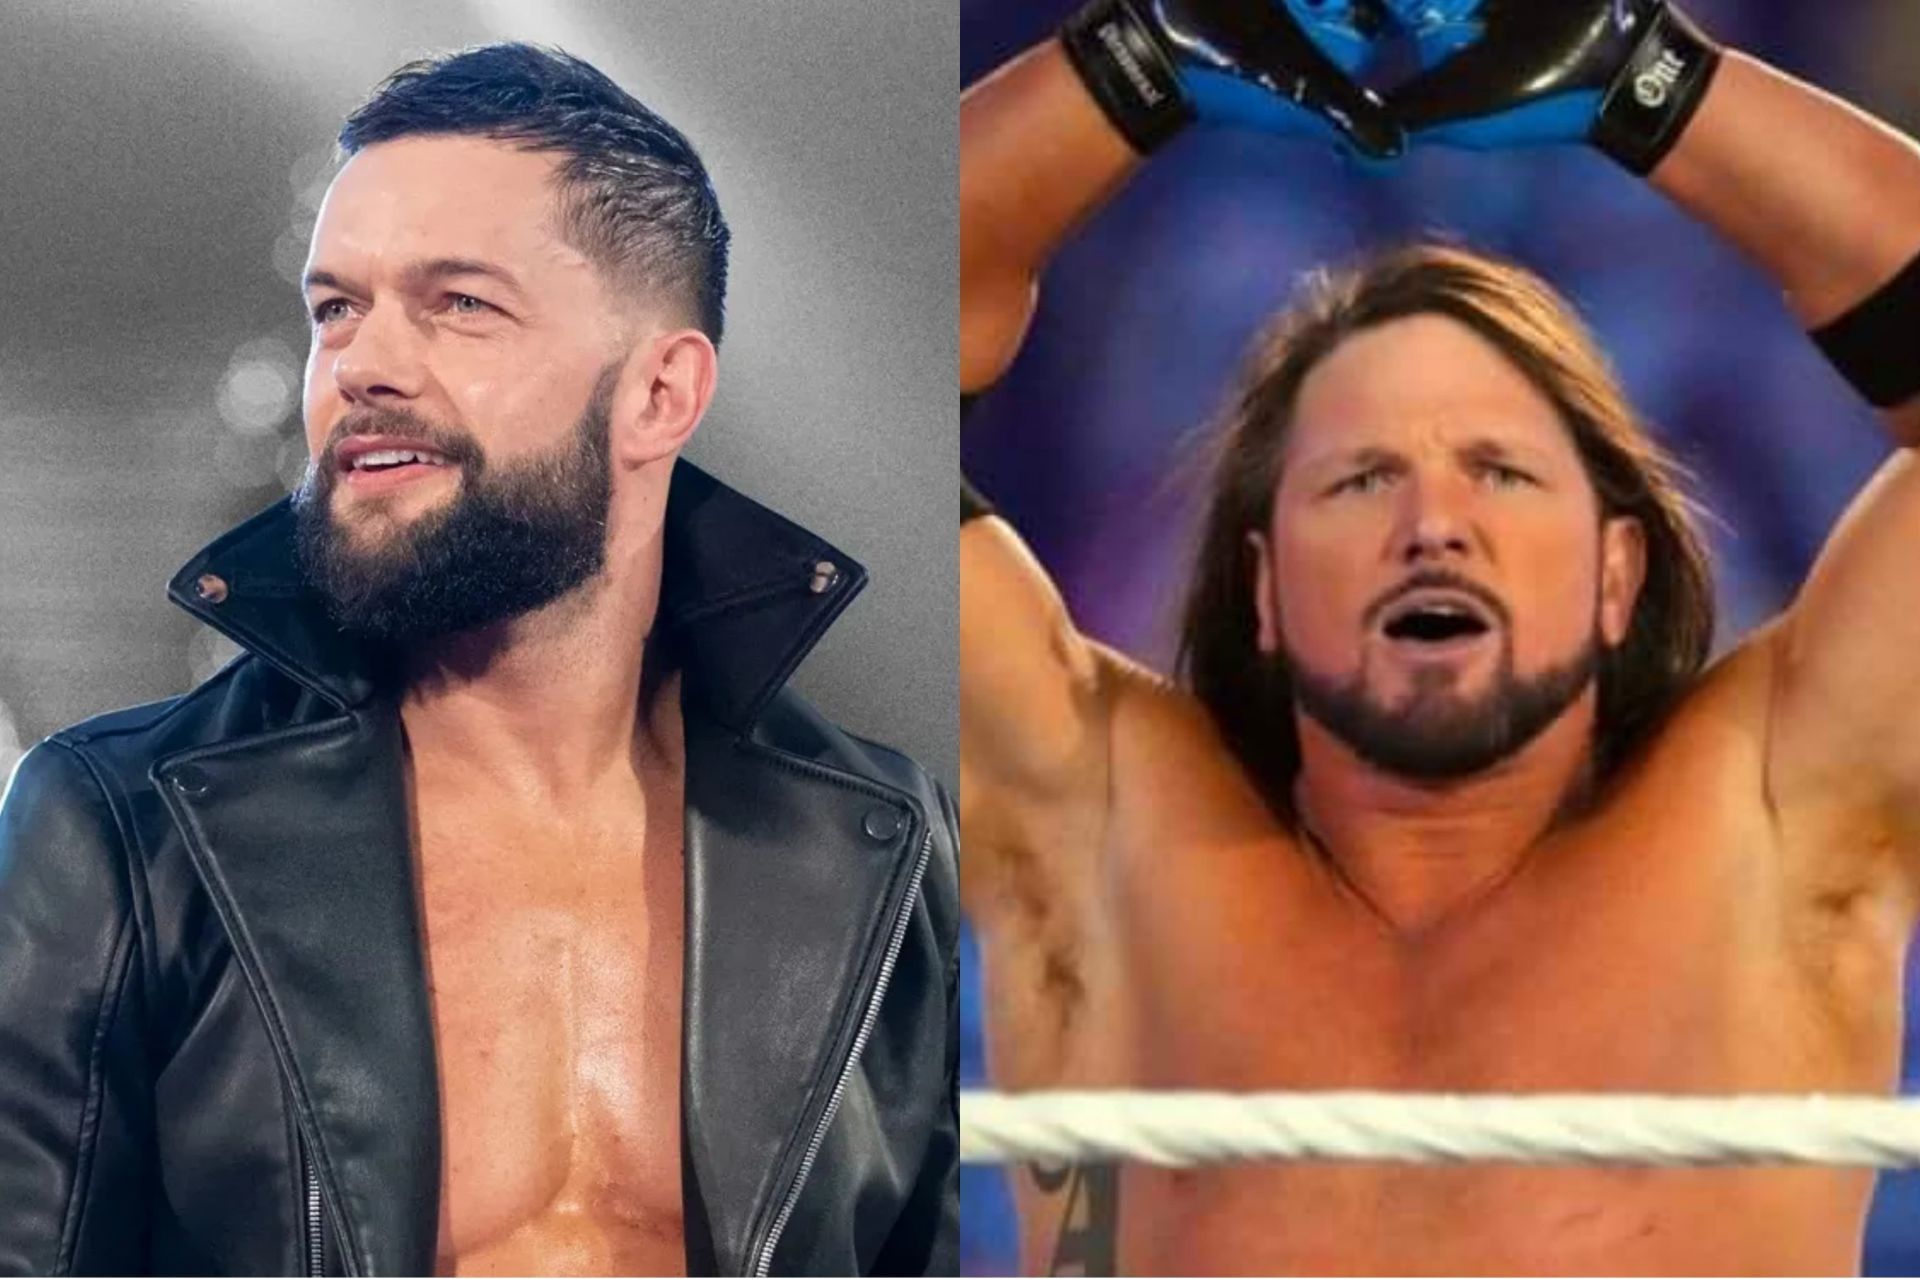 Finn Balor and AJ Styles are both former world champions.